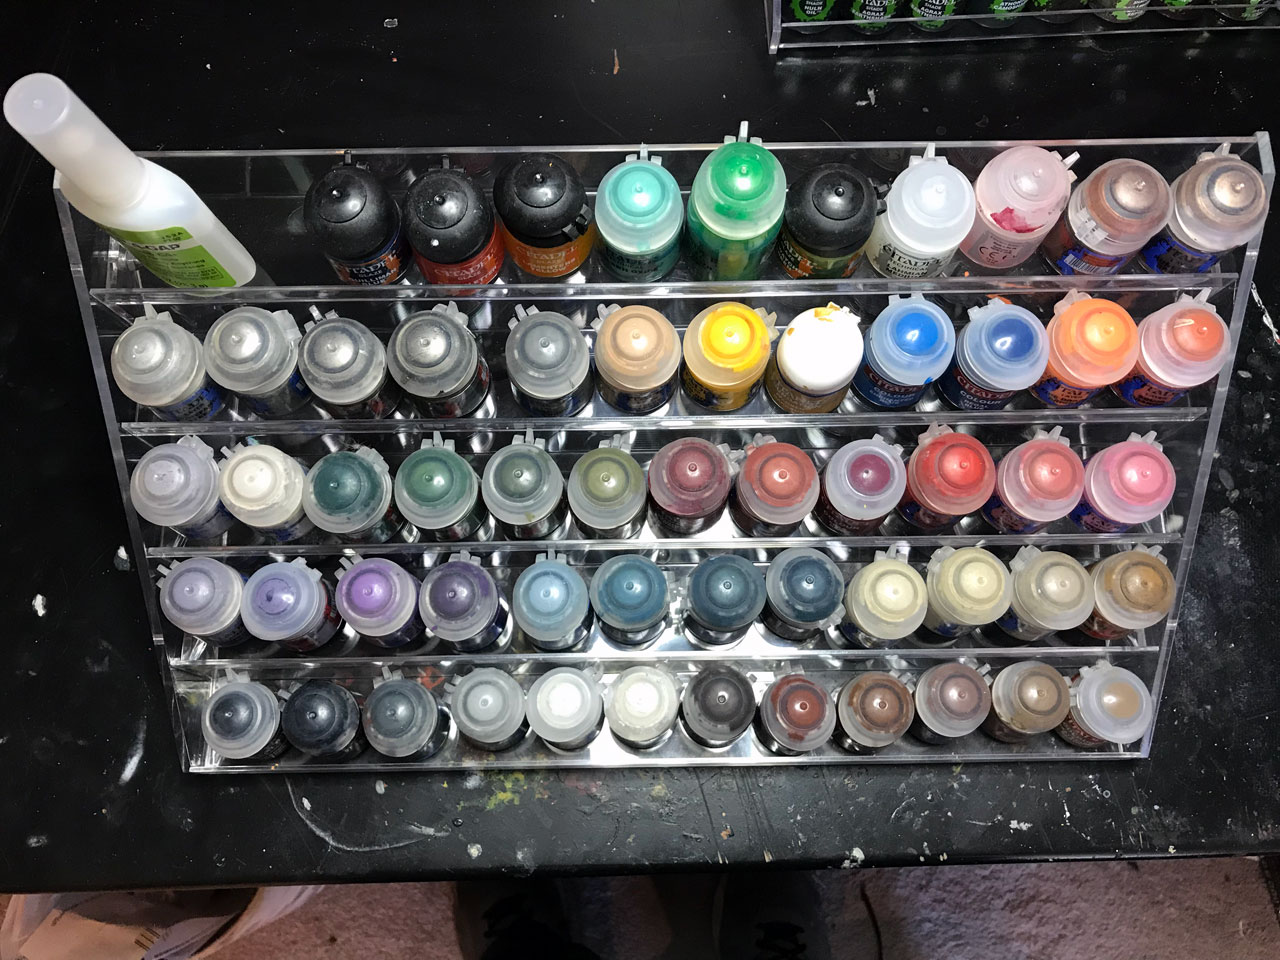 Great Rack Miniature Paint Storage, Don't Play Gray!